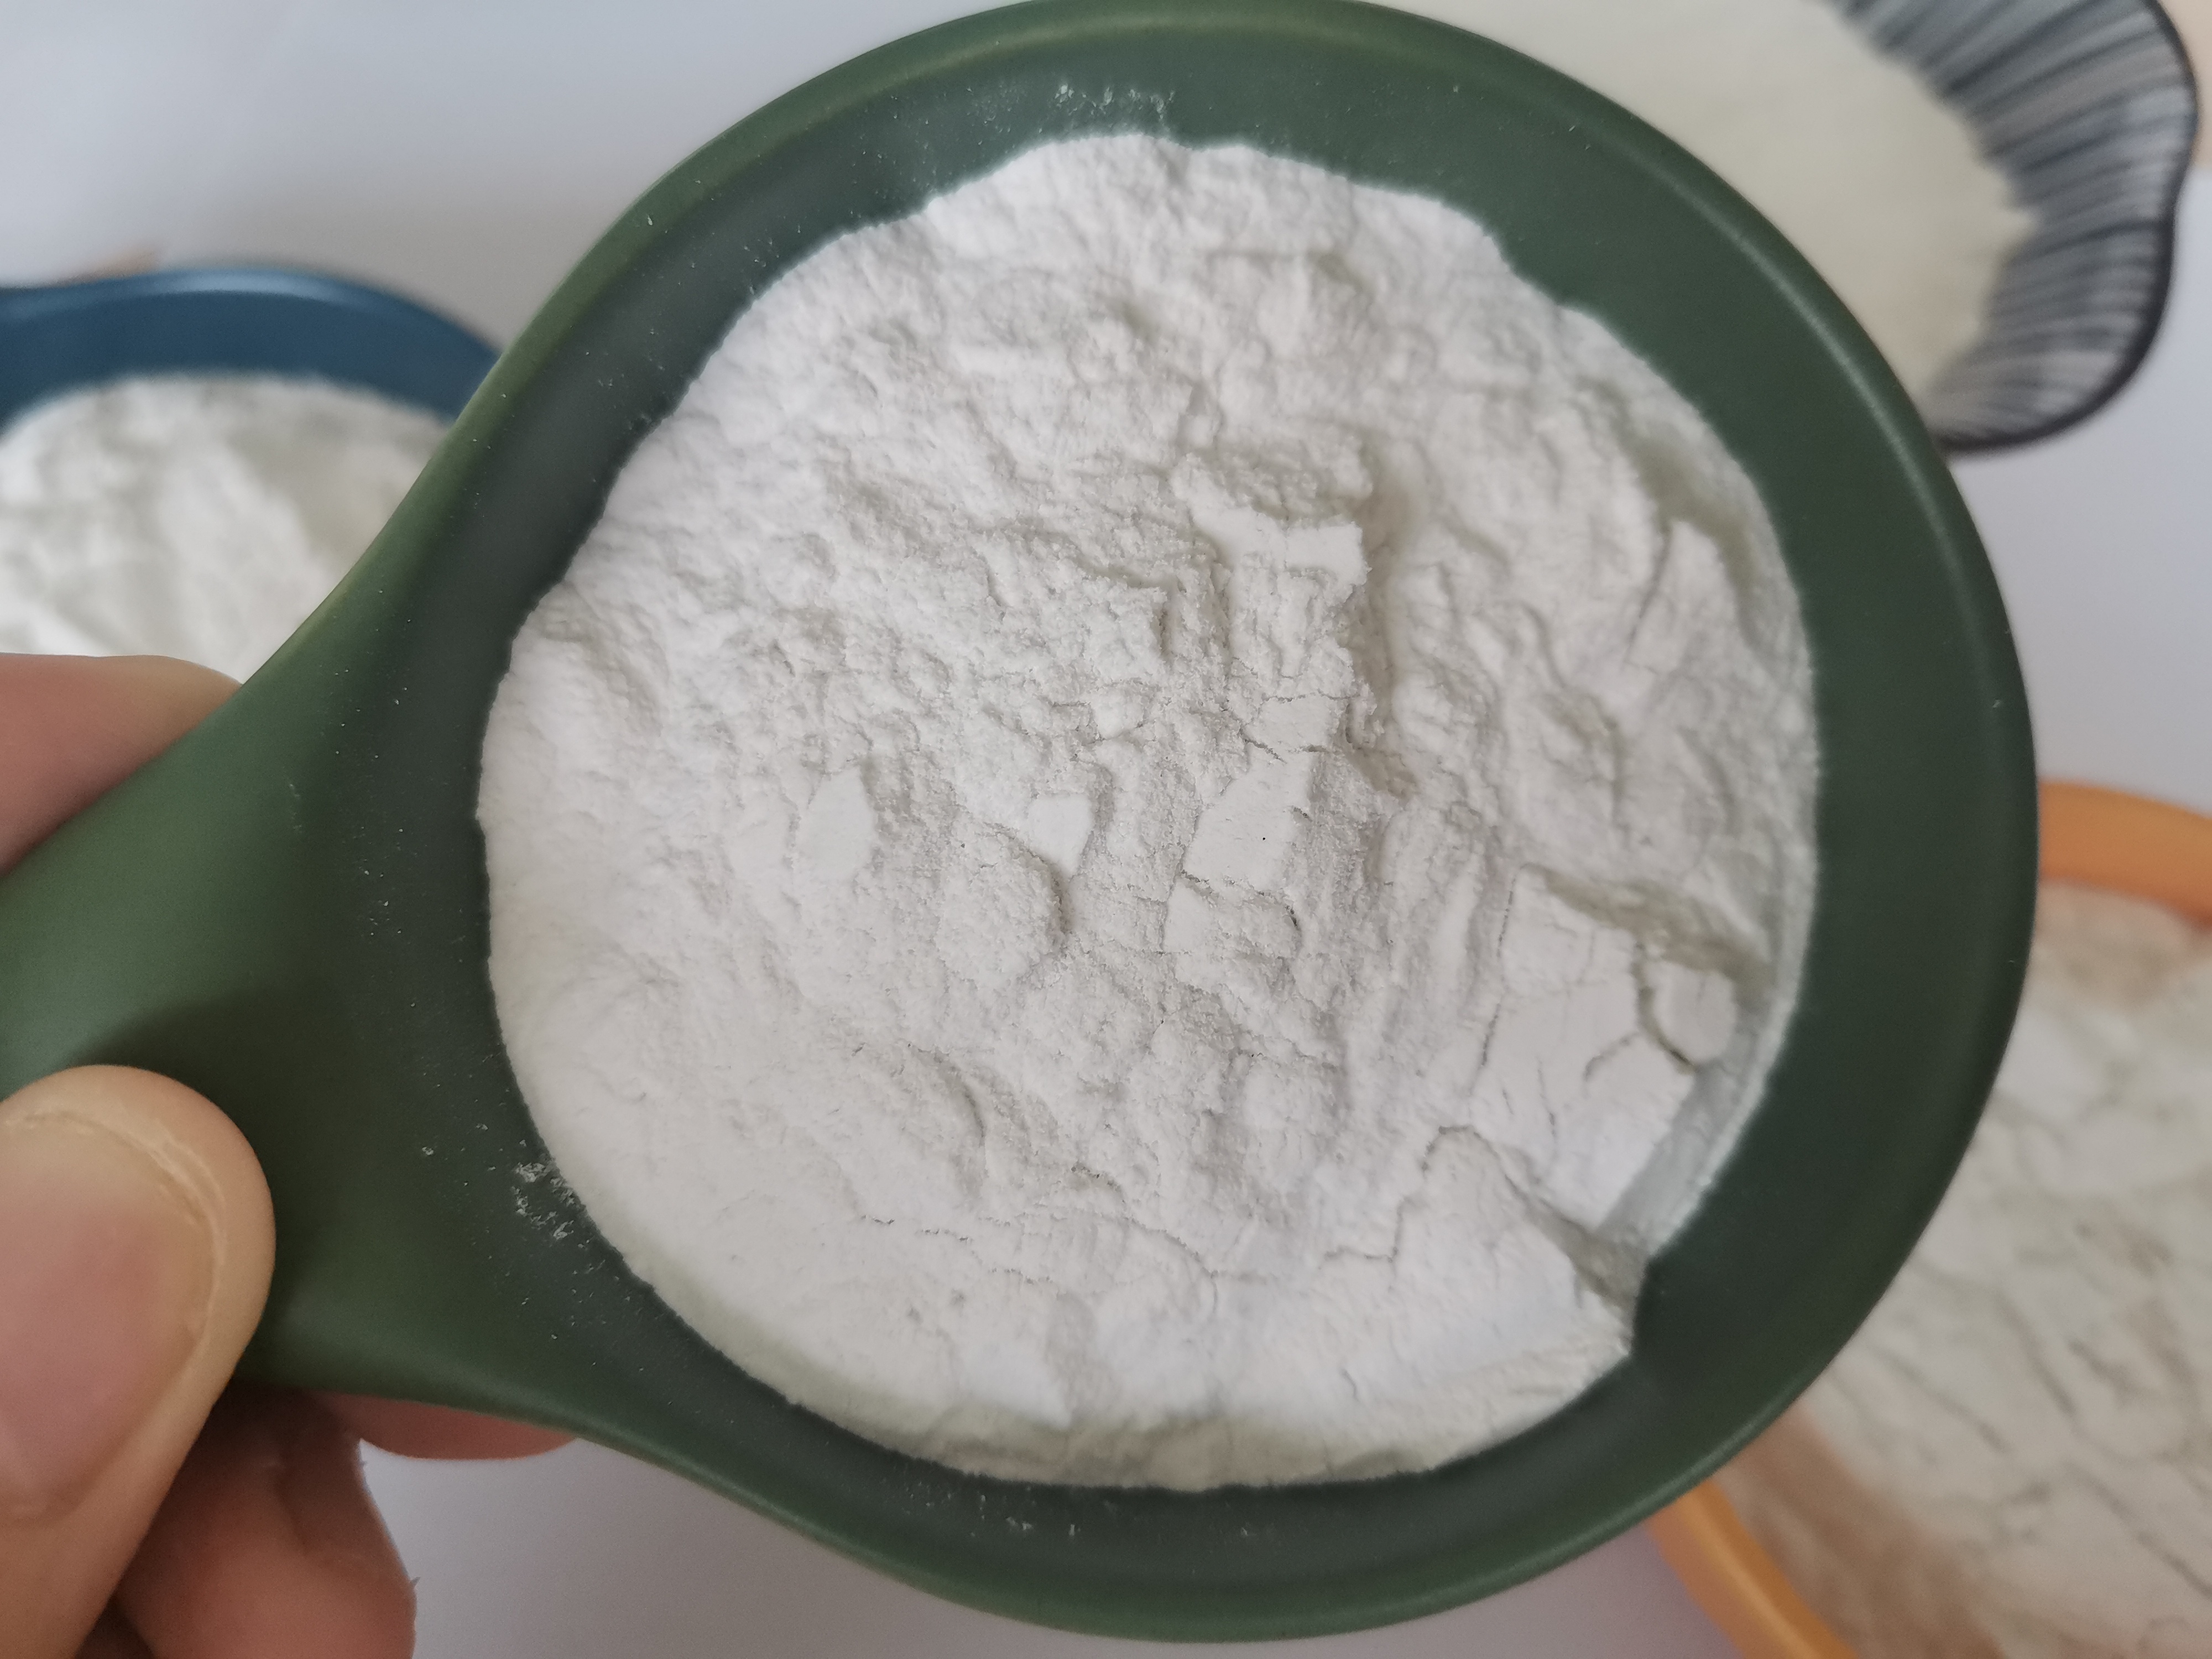 Using diatomaceous earth to filter, the principle and operation of pre-coating filter